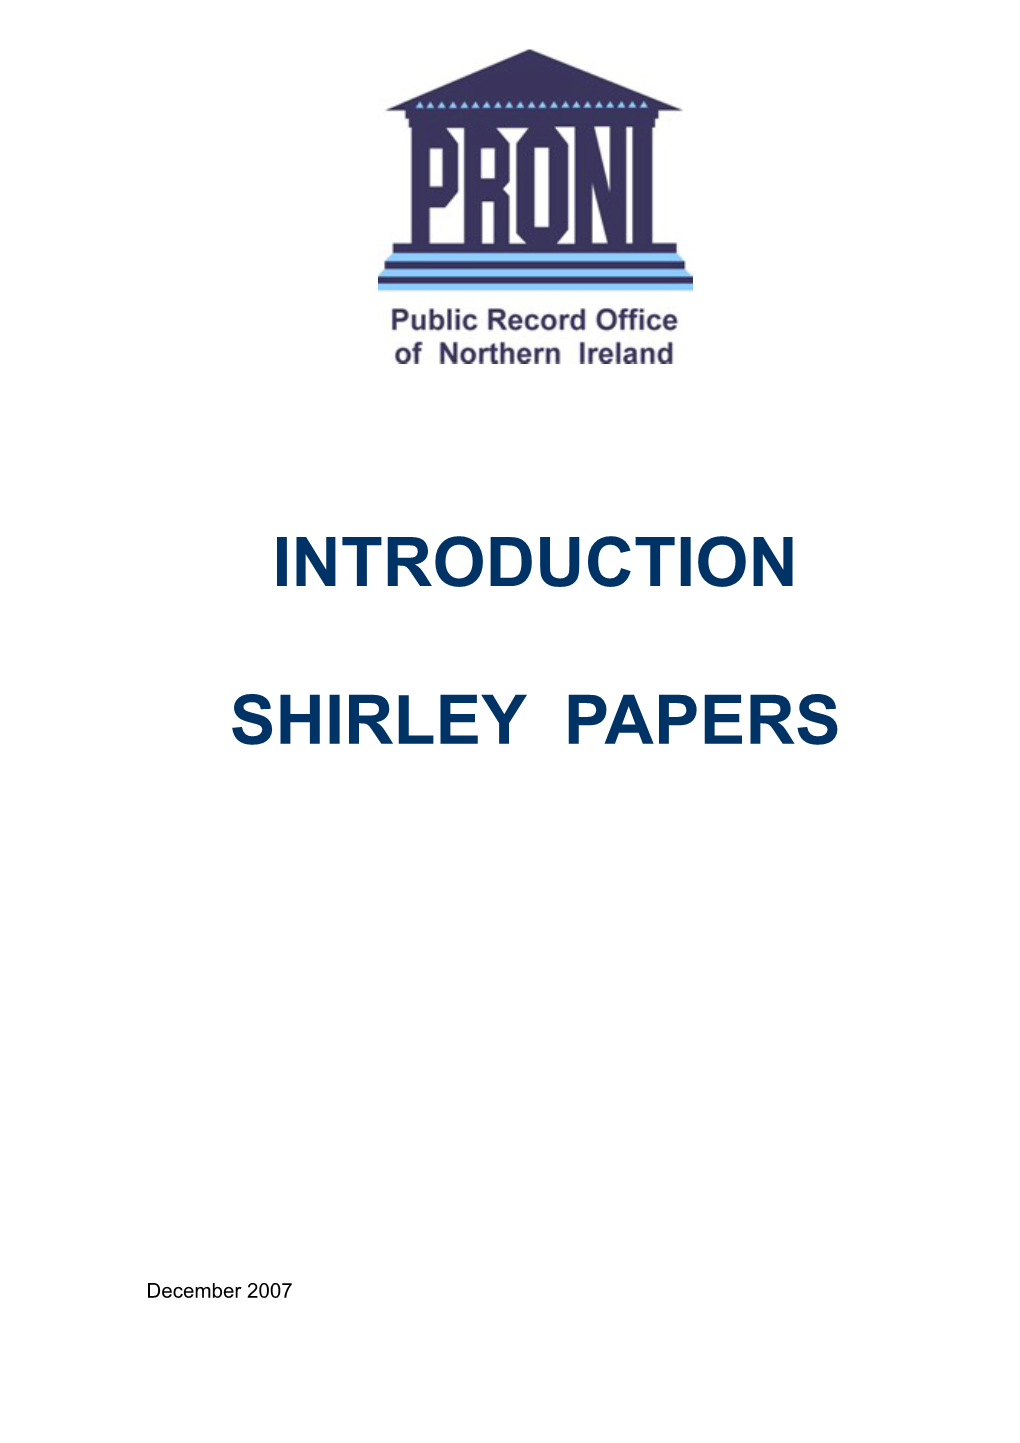 Introduction to the Shirley Papers